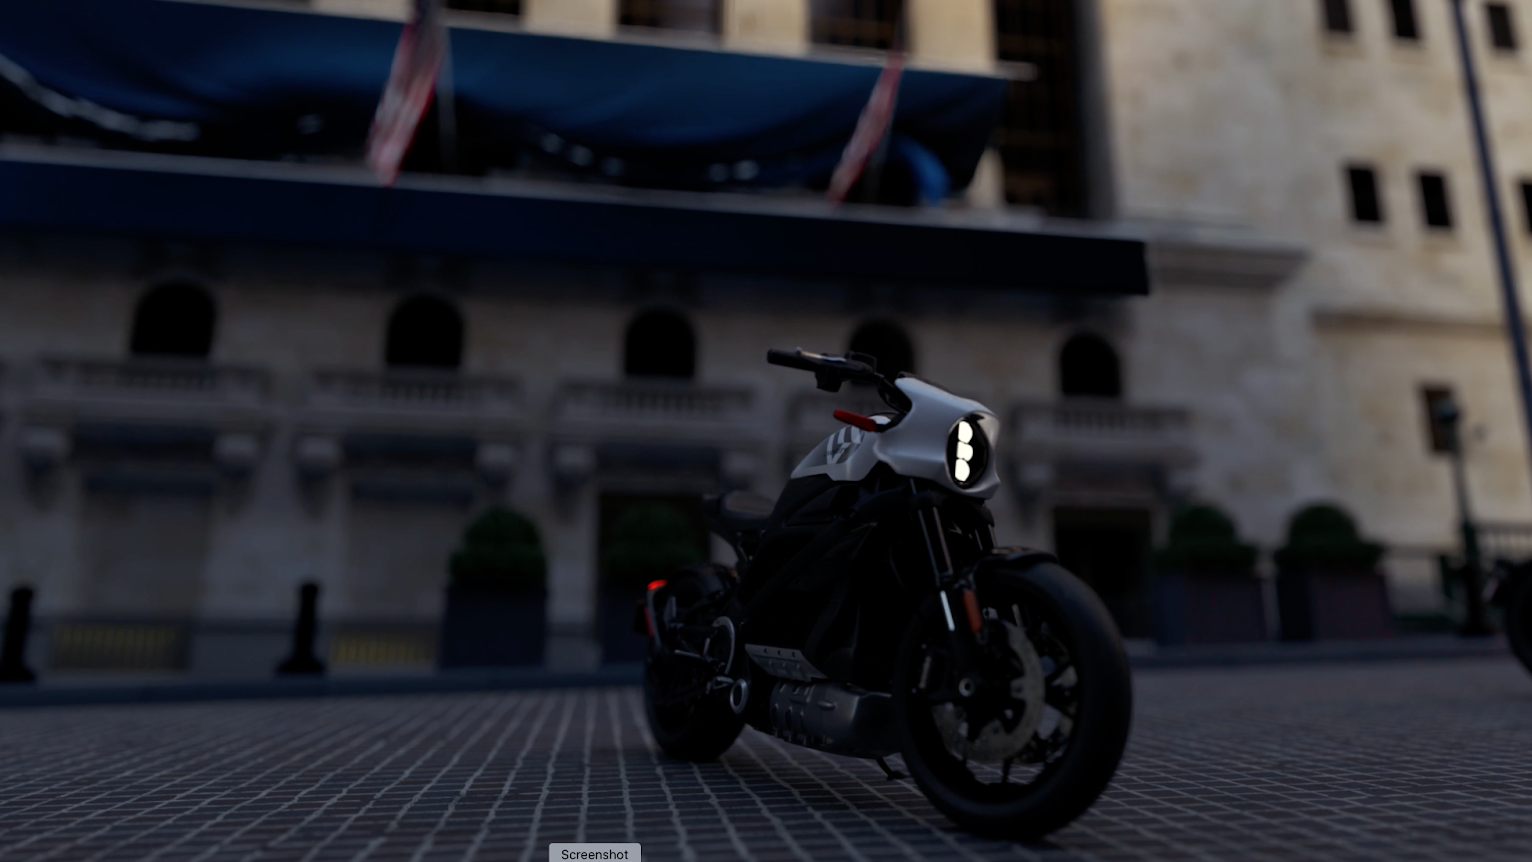 A LiveWire EV motorcycle photographed outside of the NYSE on Wall Street